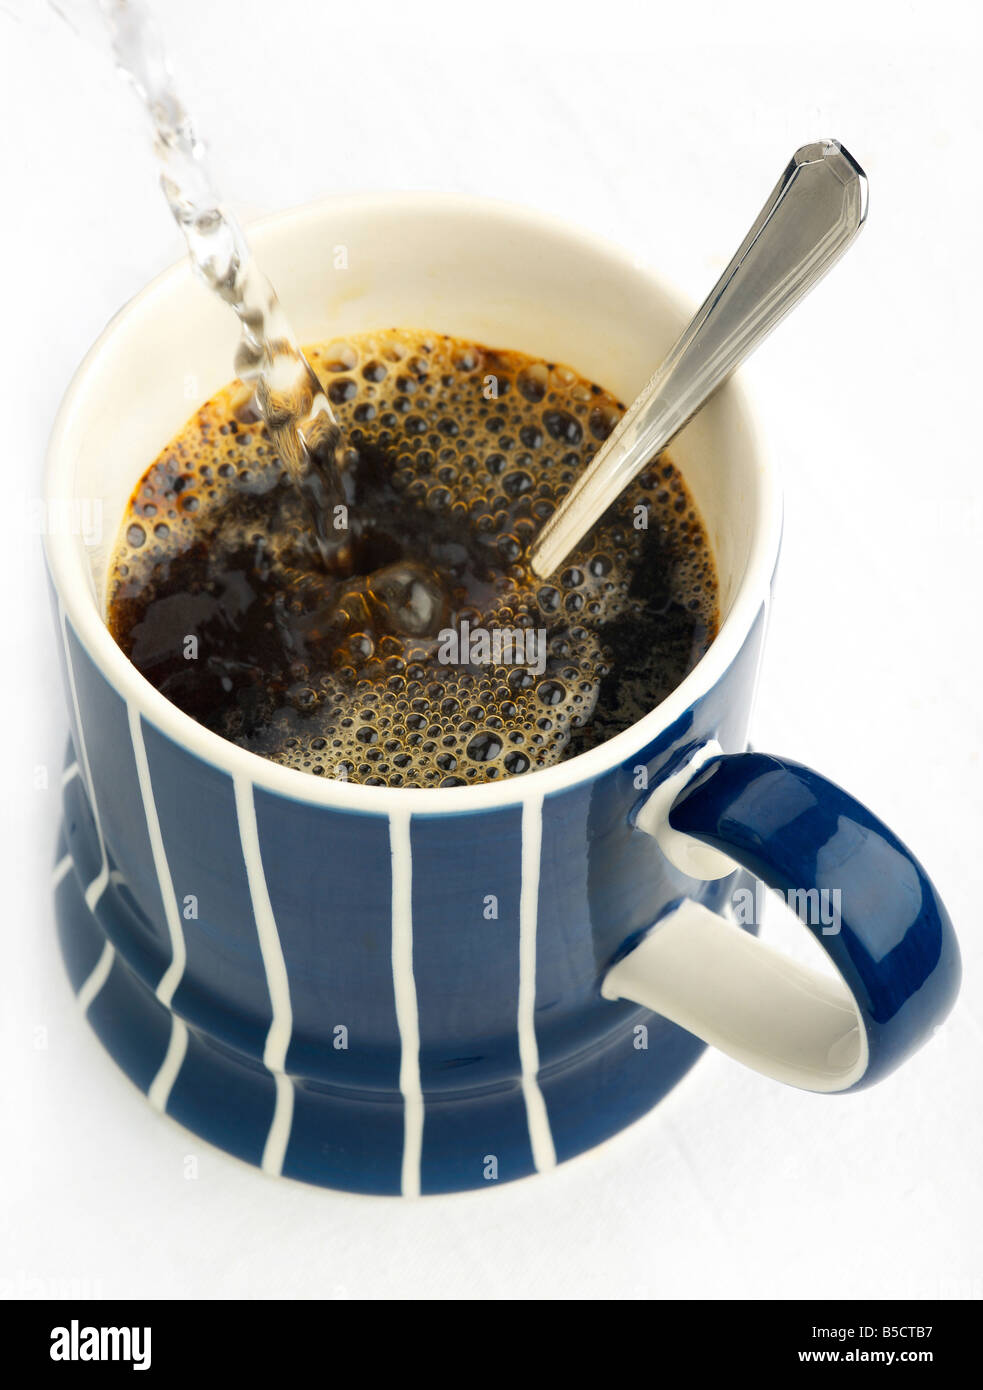 A steaming mug of instant coffee with hot water being poured Stock Photo